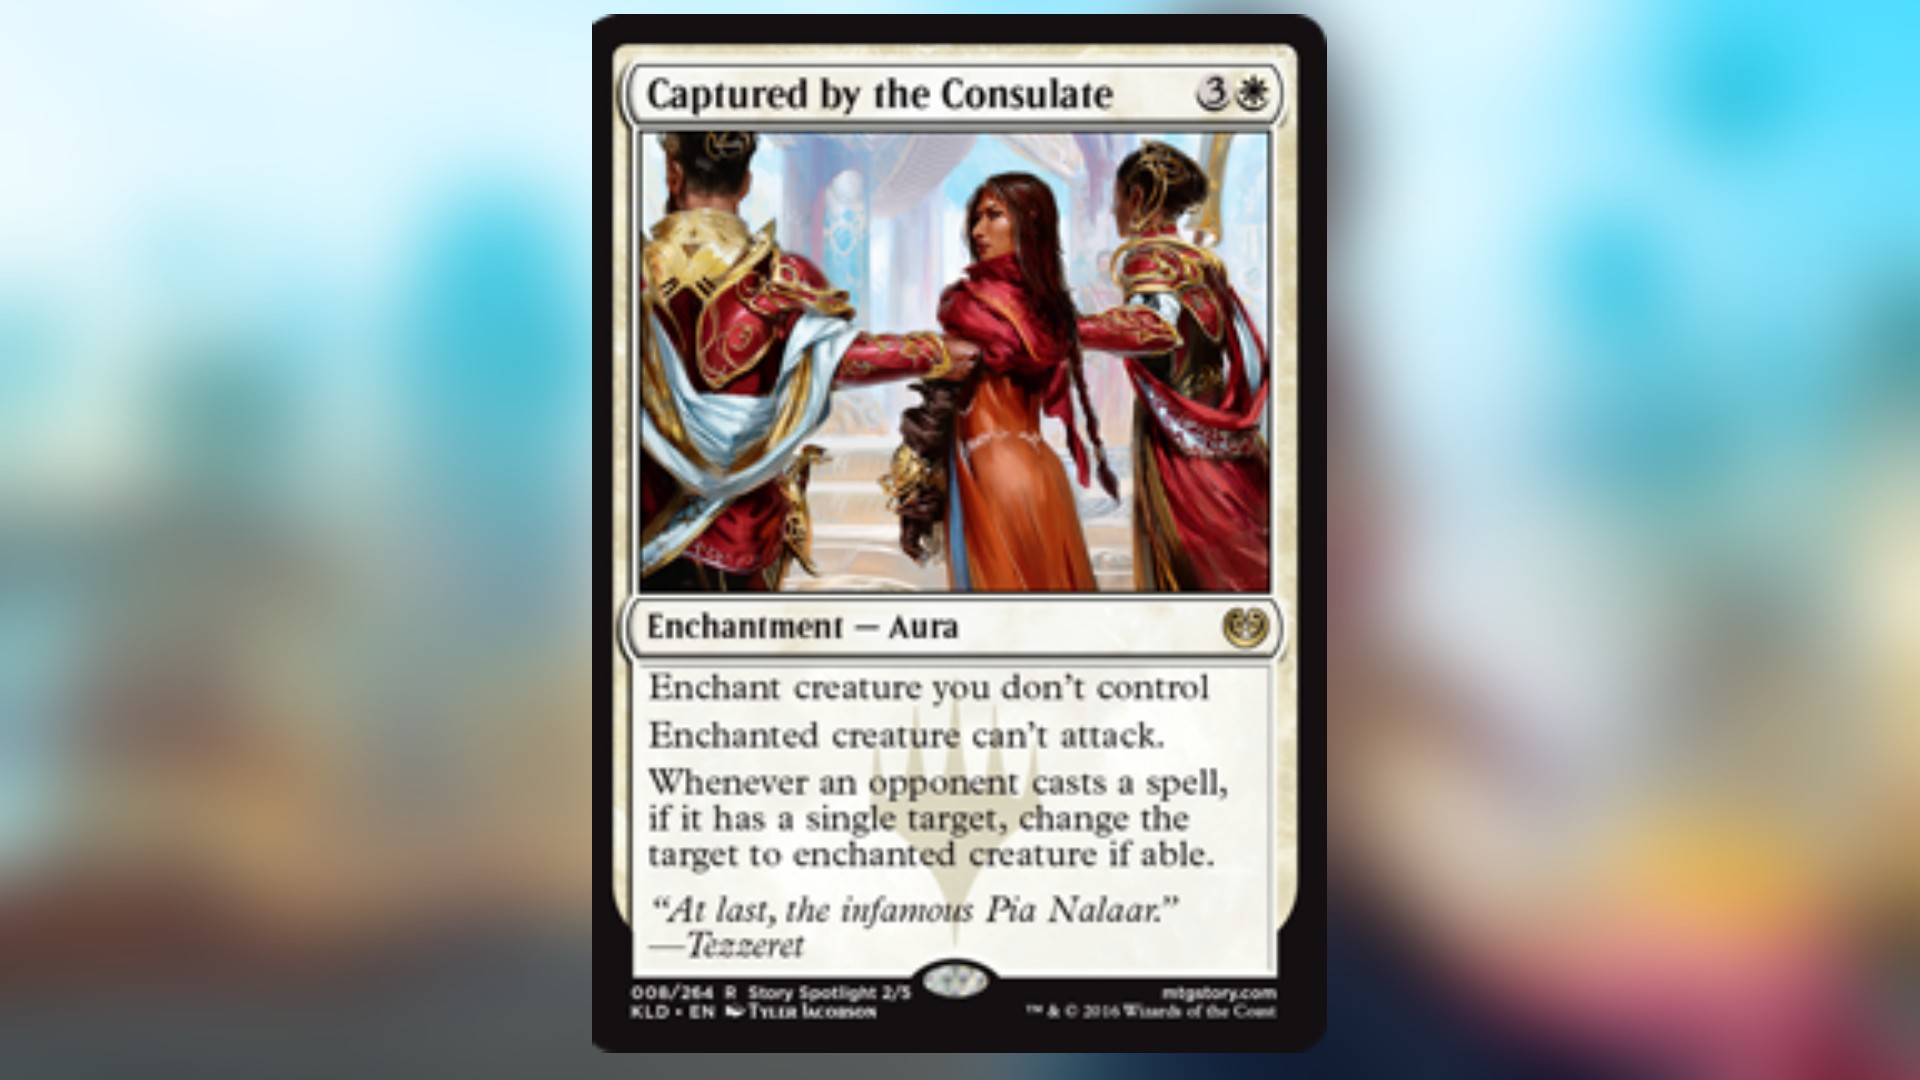 magic card in white with art of a woman being led away by two unseeable figures